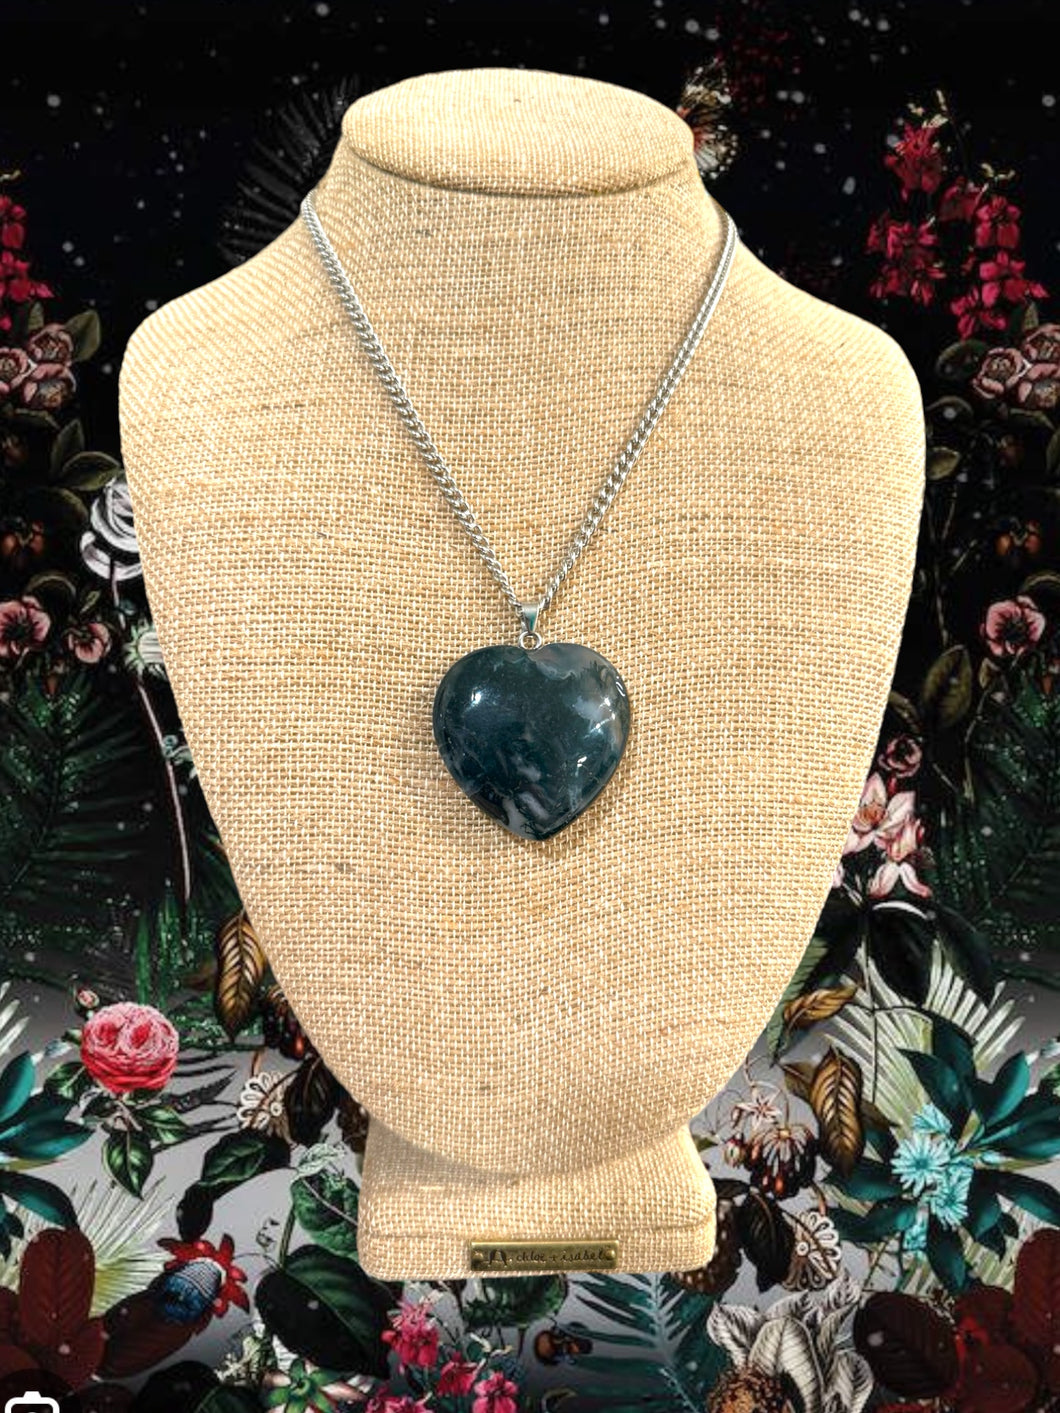 AAA Natural Moss Agate Puffy Heart Gemstone necklace 
#1